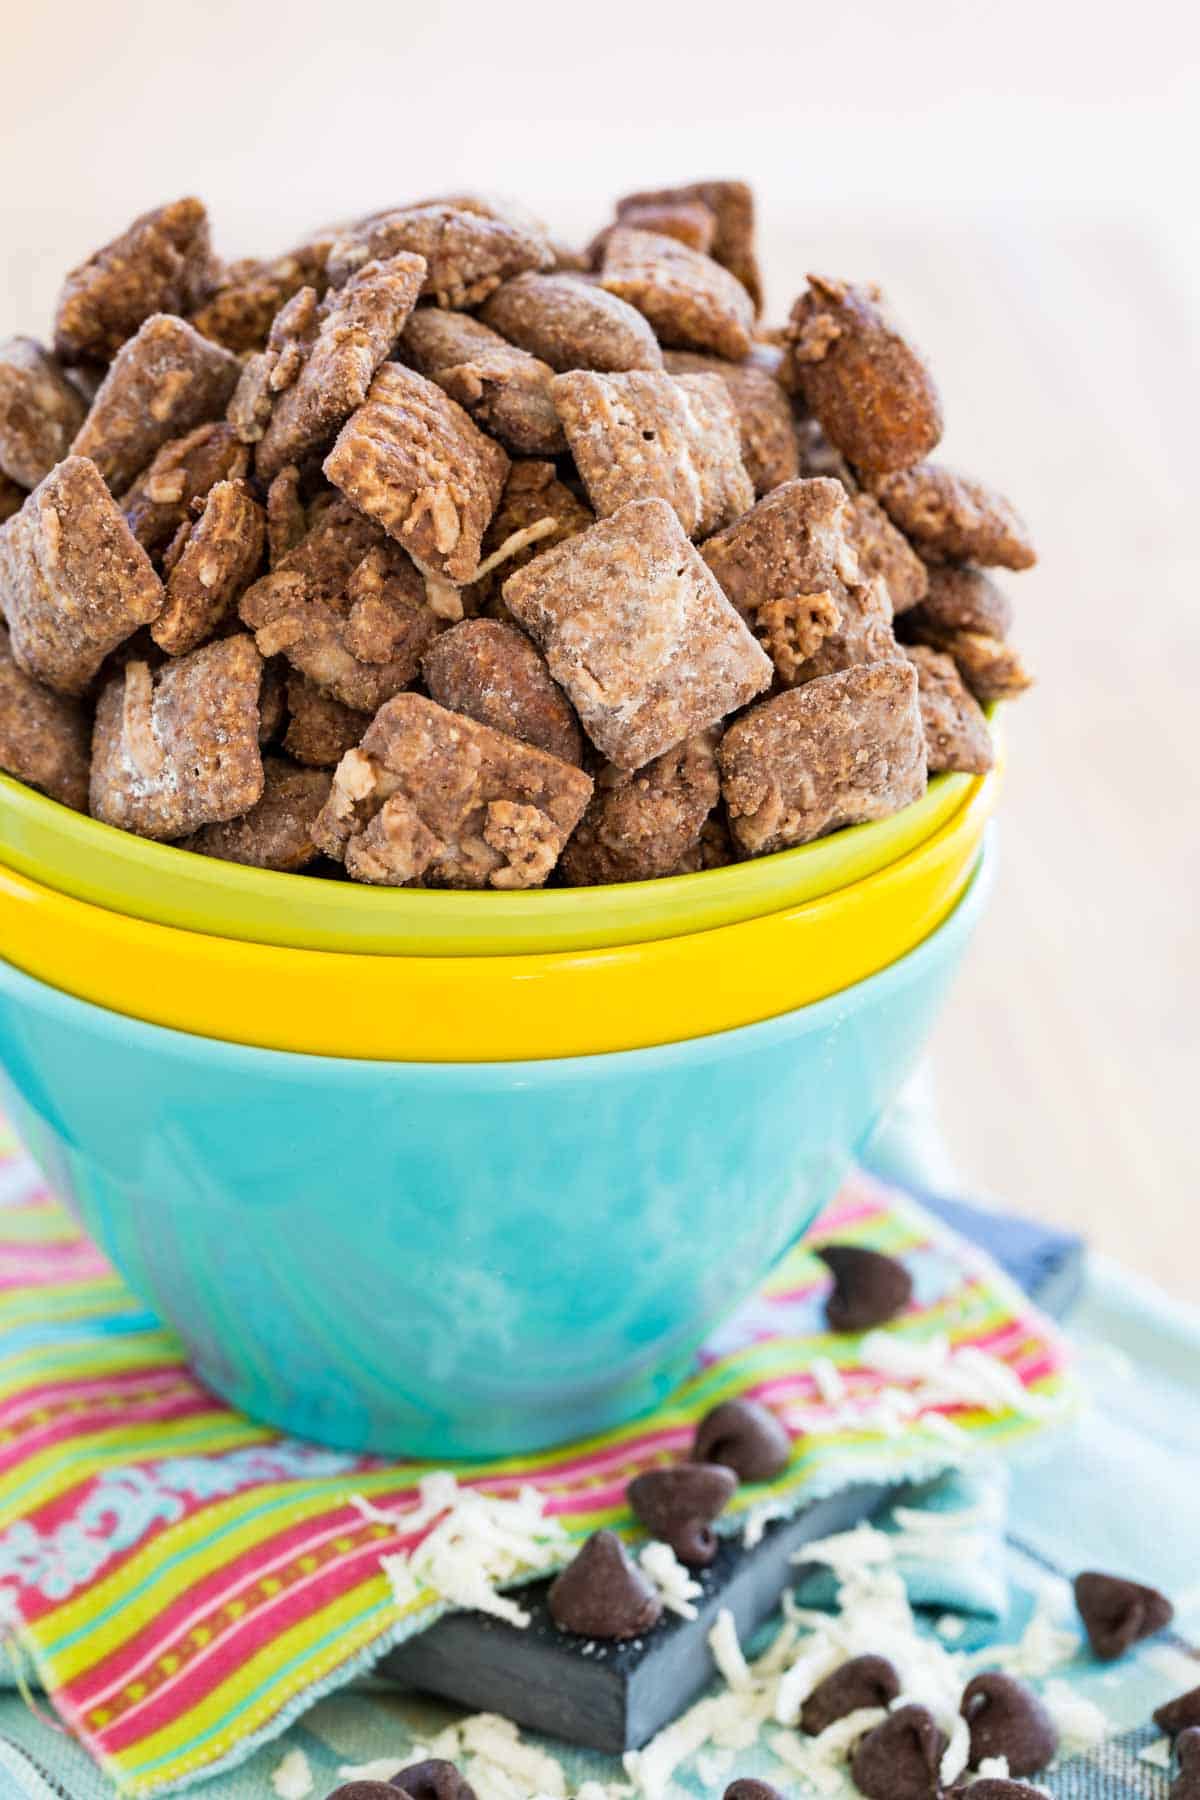 Three blue, yellow, and green bowls stacked together with puppy chow snack mix in the top one and coconut and chocolate chips scattered on the table.